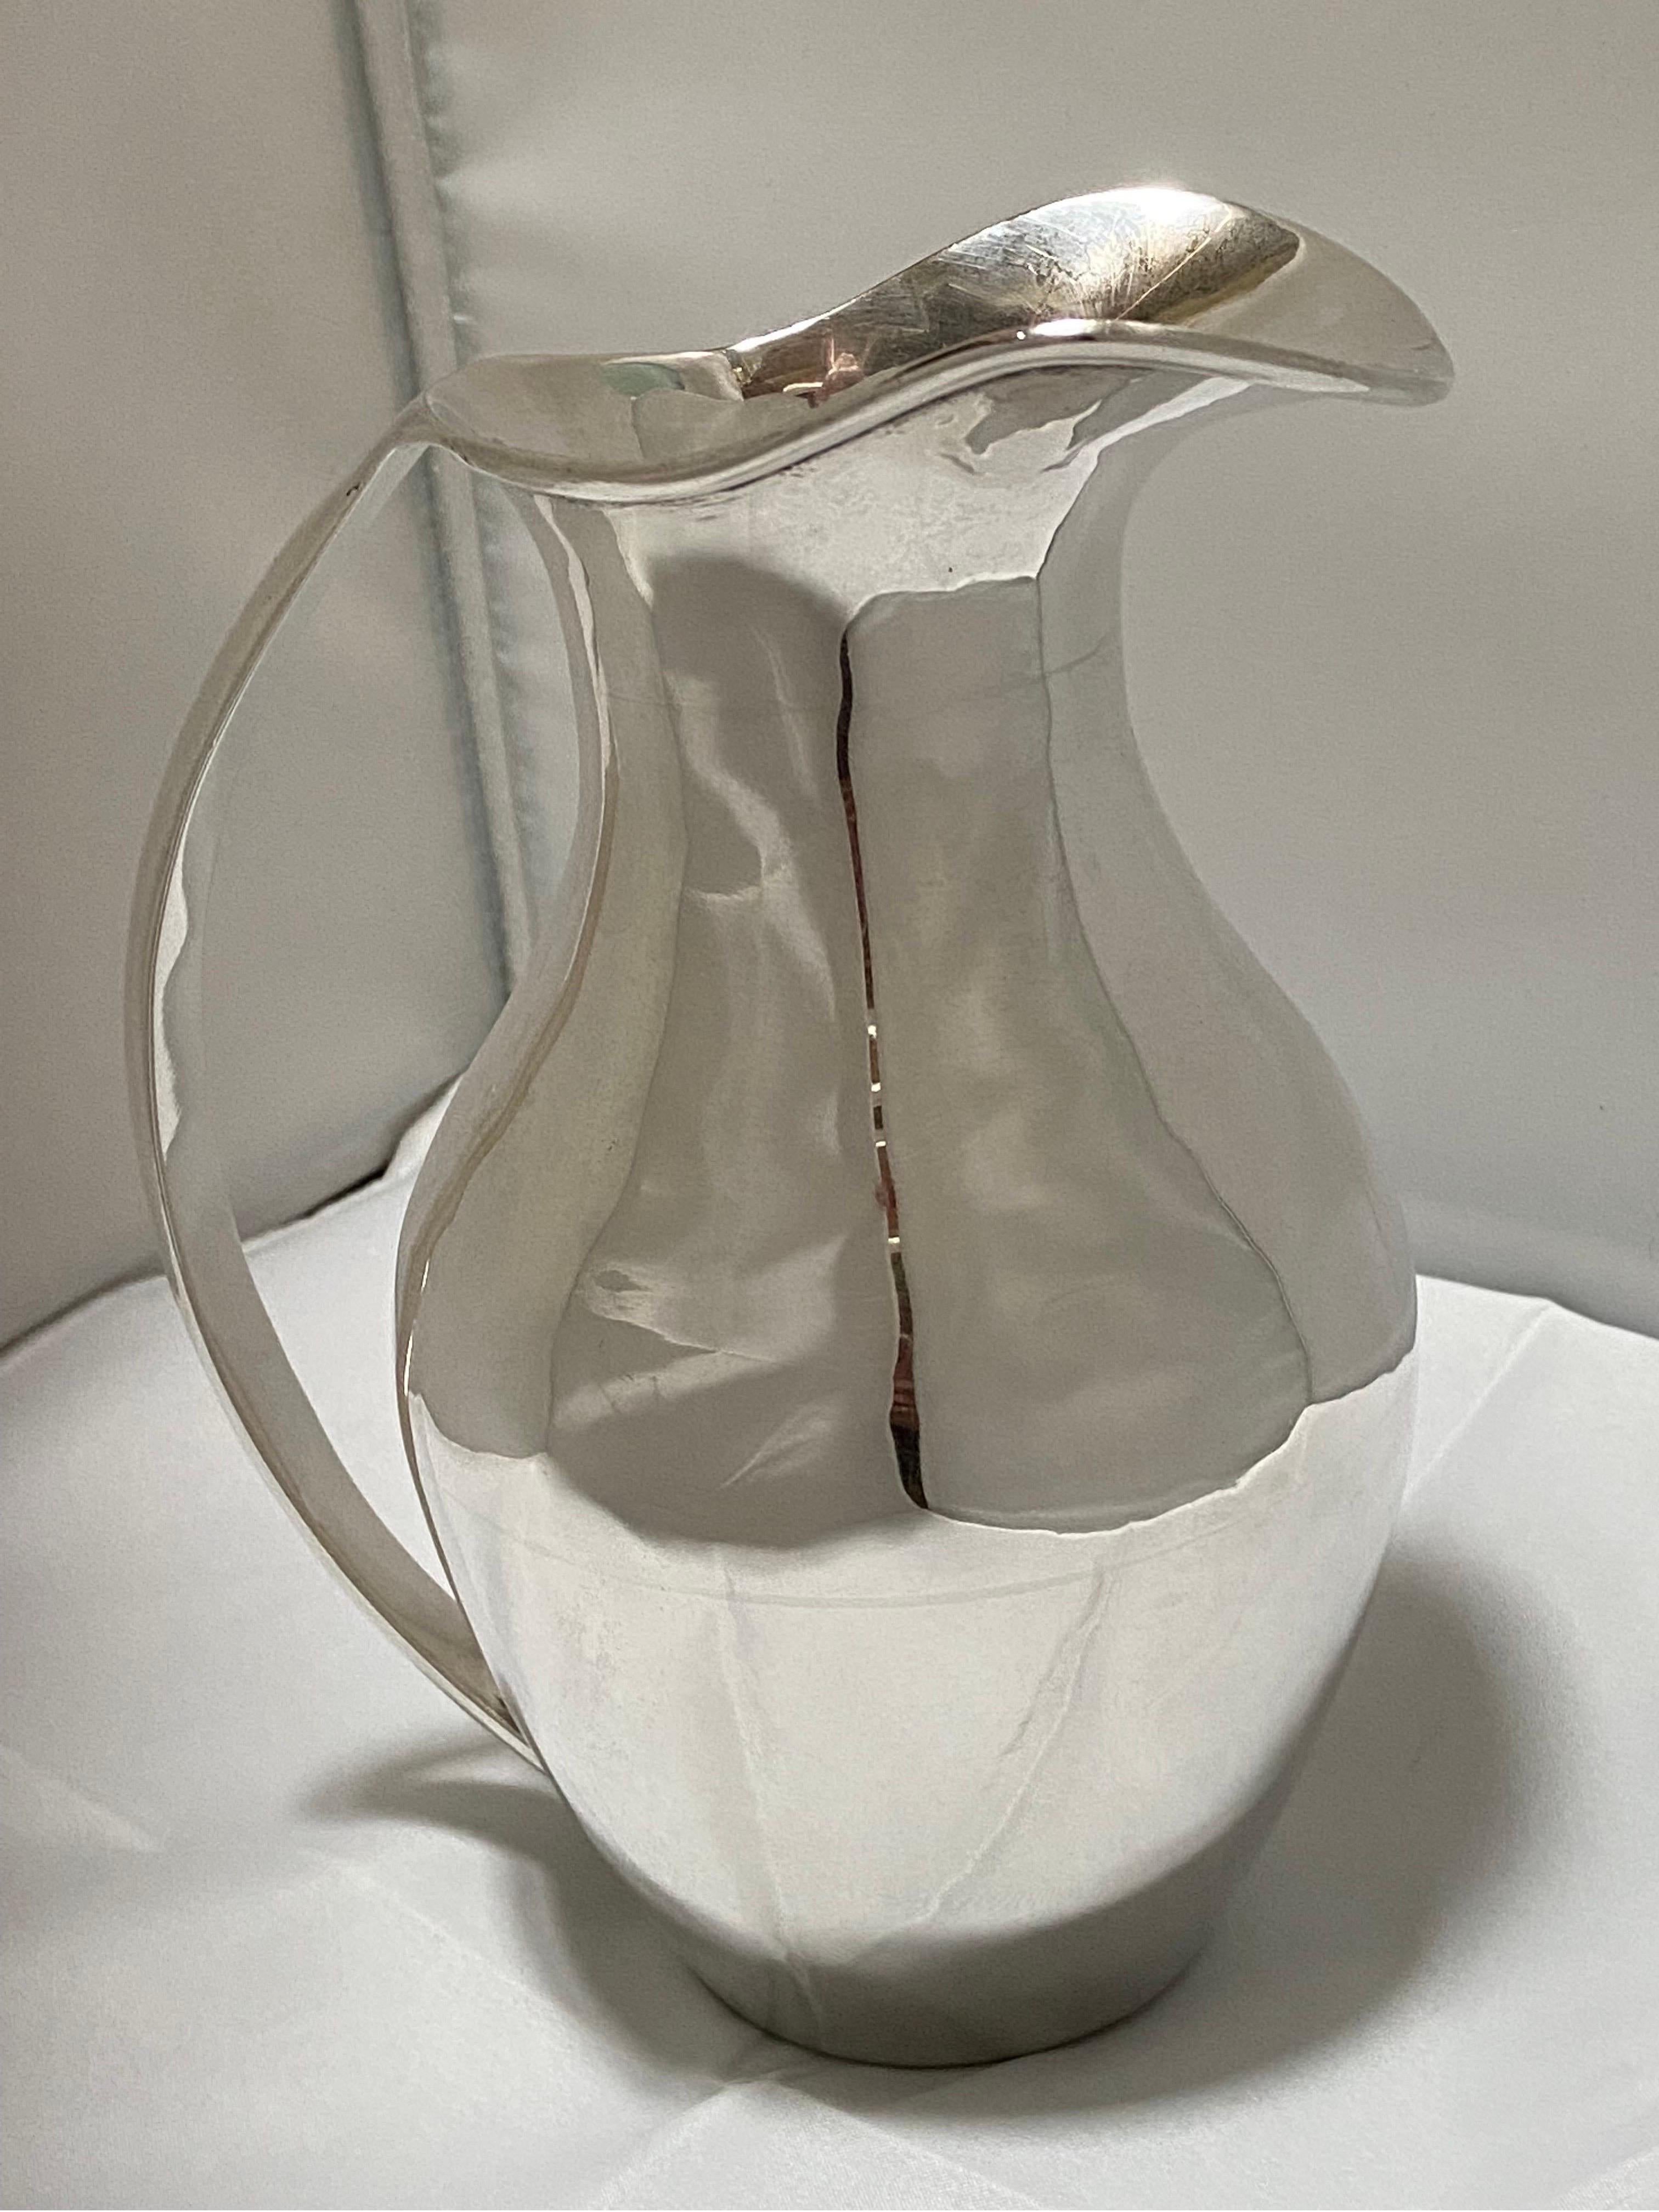 Hand-Crafted Vintage Mid-Century Mexican Sterling Silver Modernist Pitcher or Ewer by Zurita For Sale